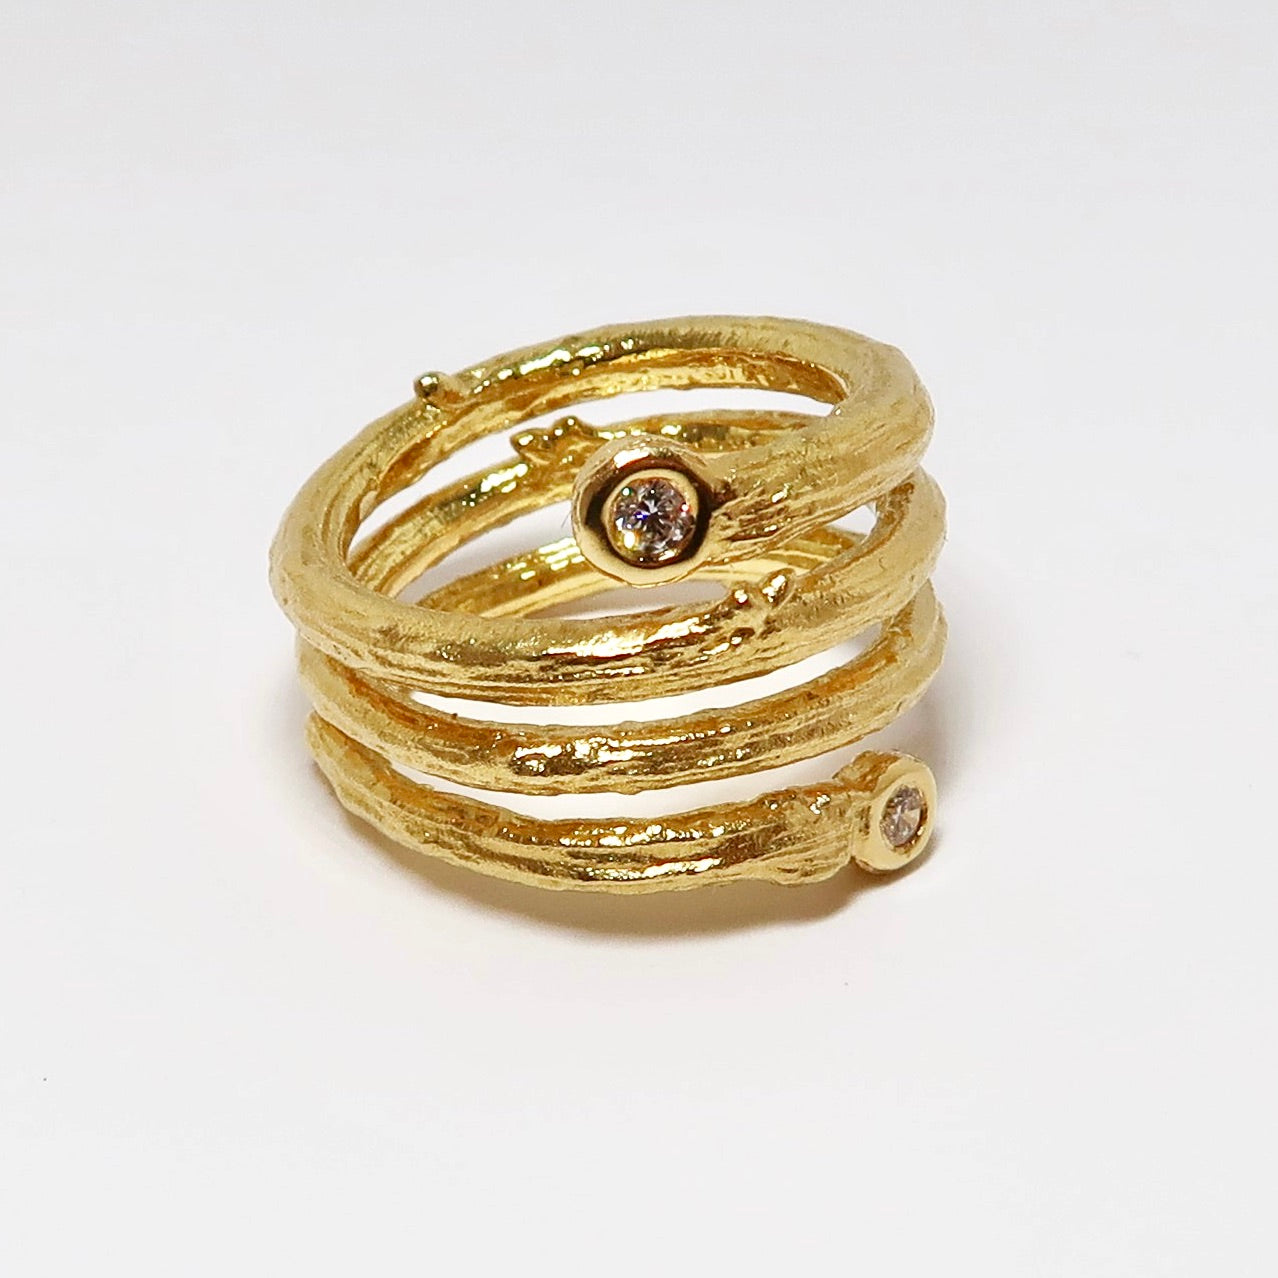 19k Yellow Gold Coil Ring